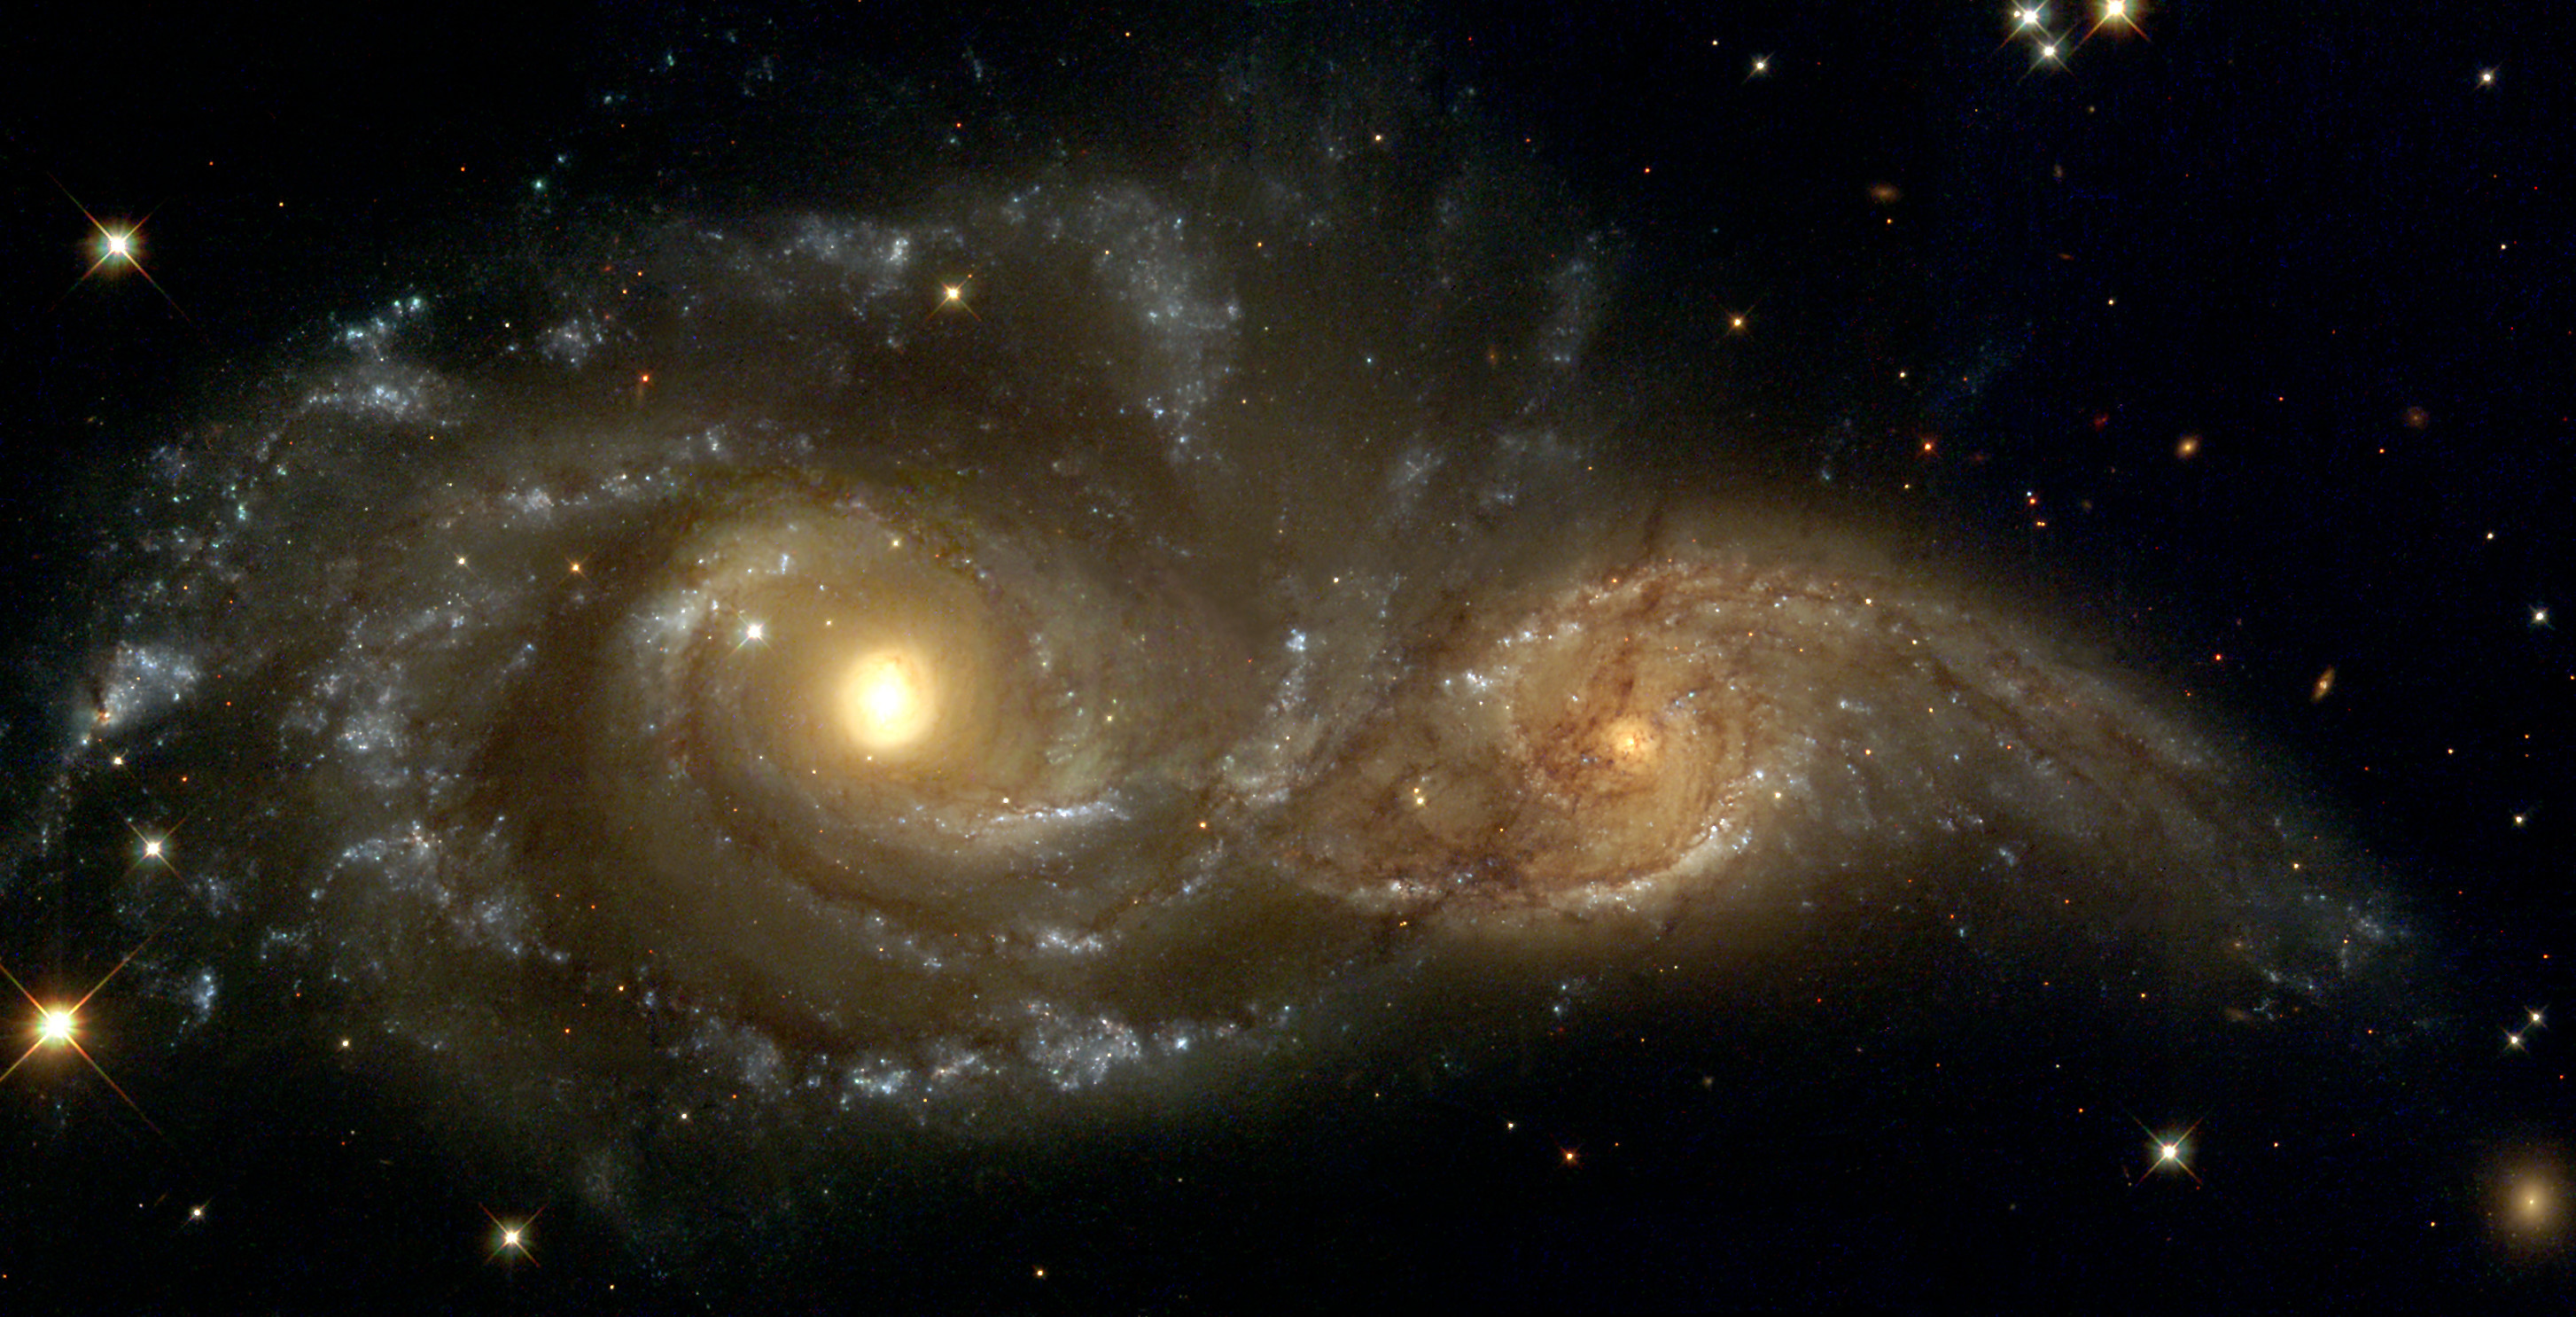 2907x1486 A grazing encounter between two spiral galaxies